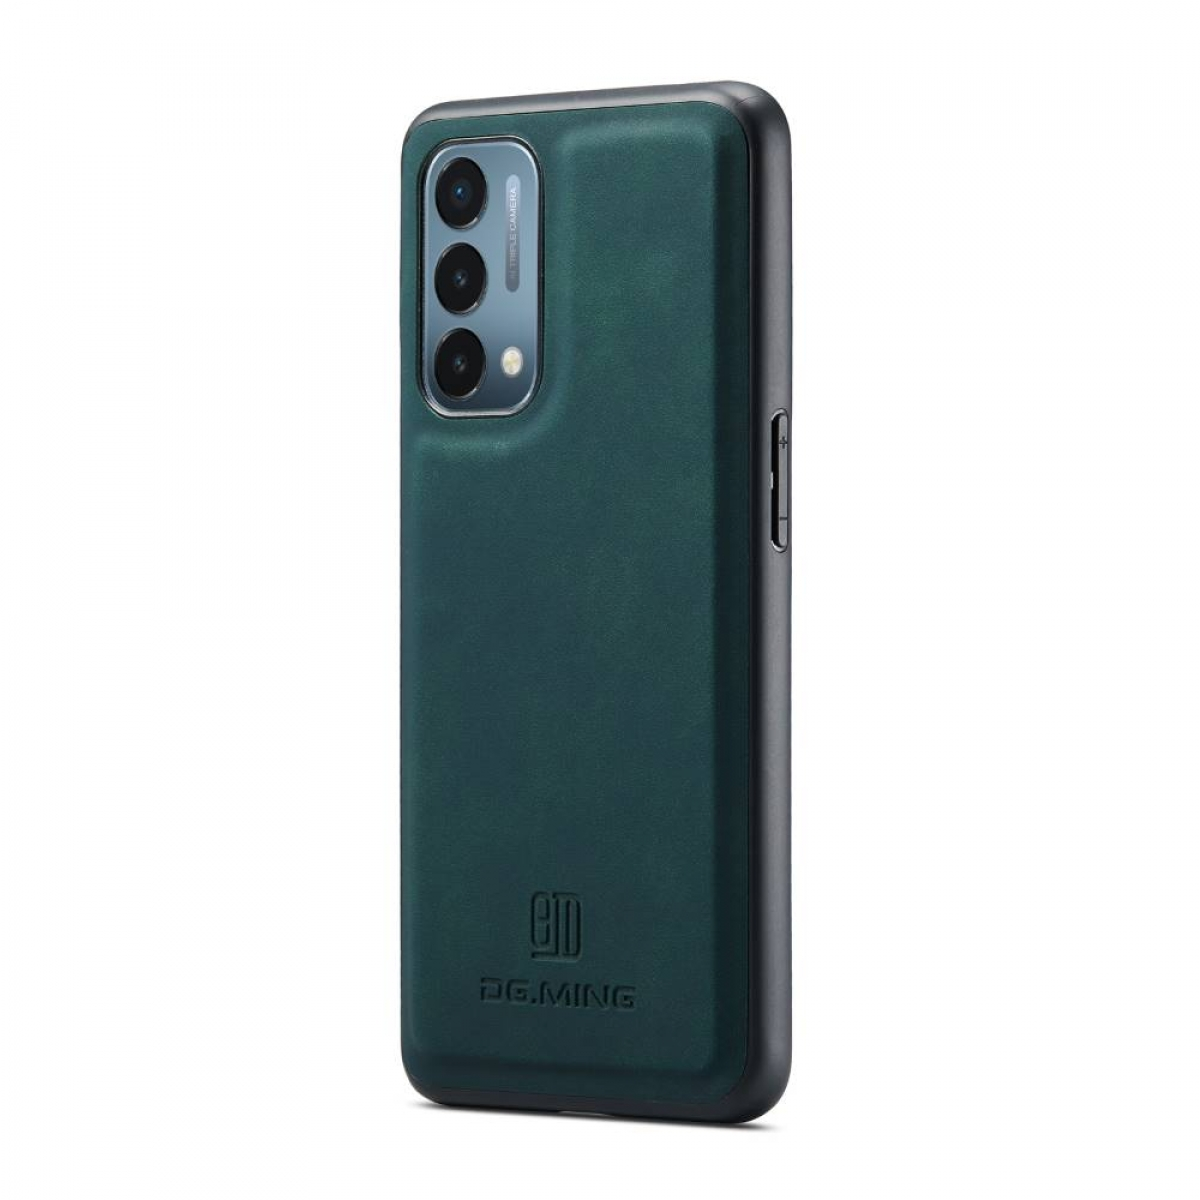 Backcover, Nord MING OnePlus, 5G, N200 Petrol DG 2in1, M2